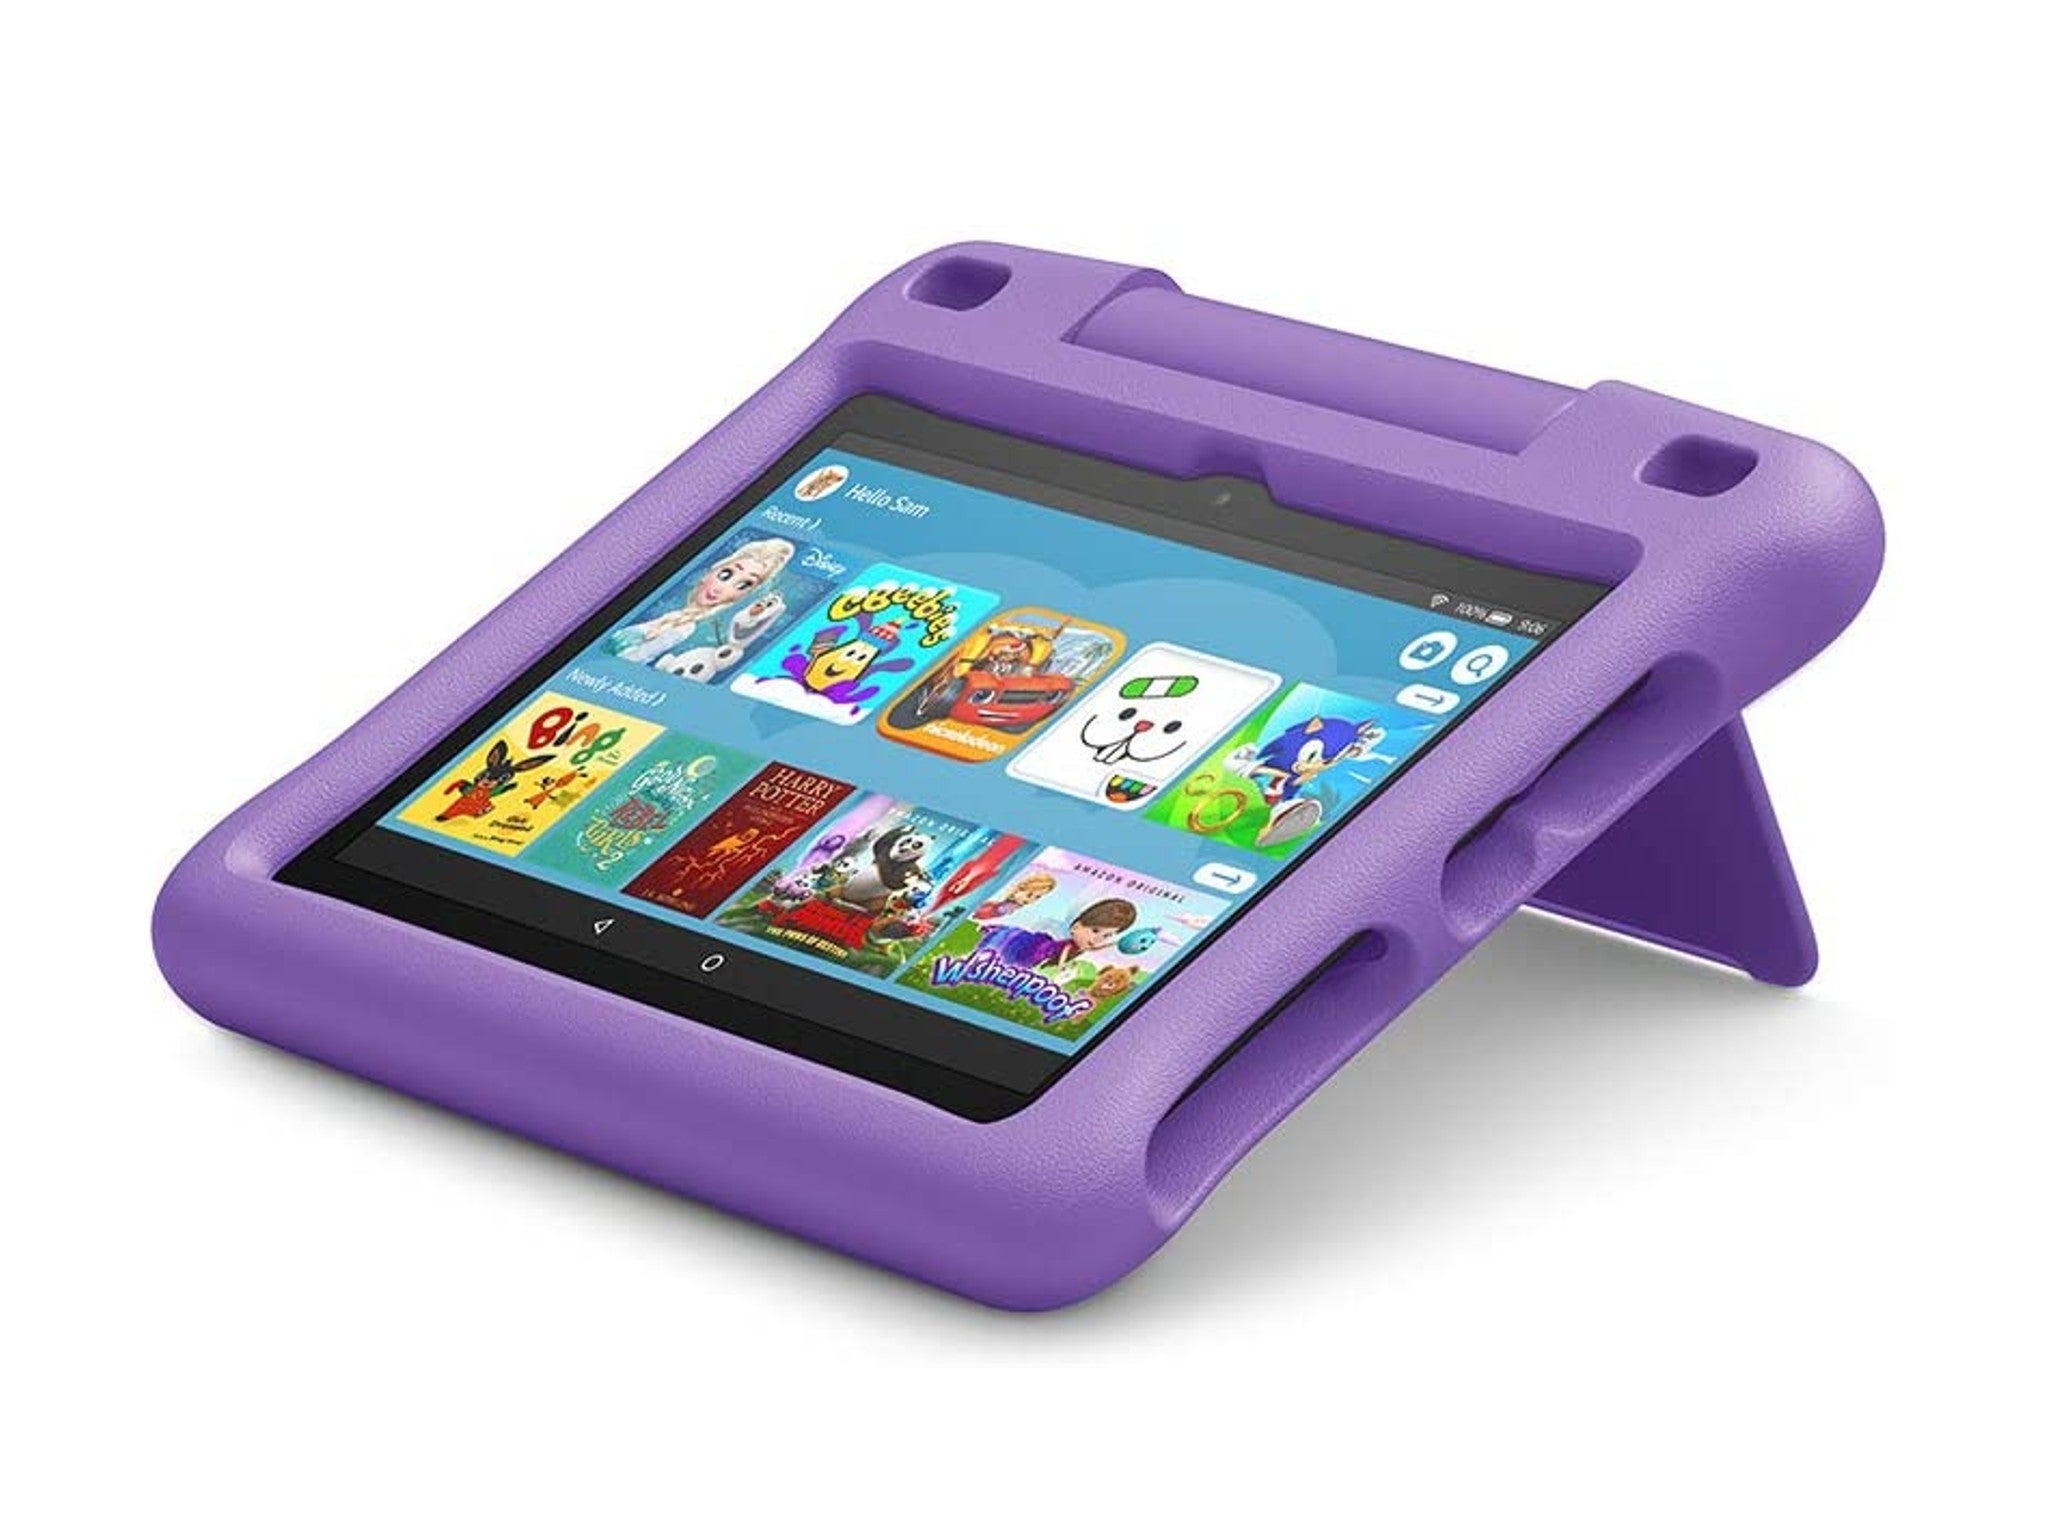 Amazon kid-proof case for Fire HD8 tablet indybest.jpg